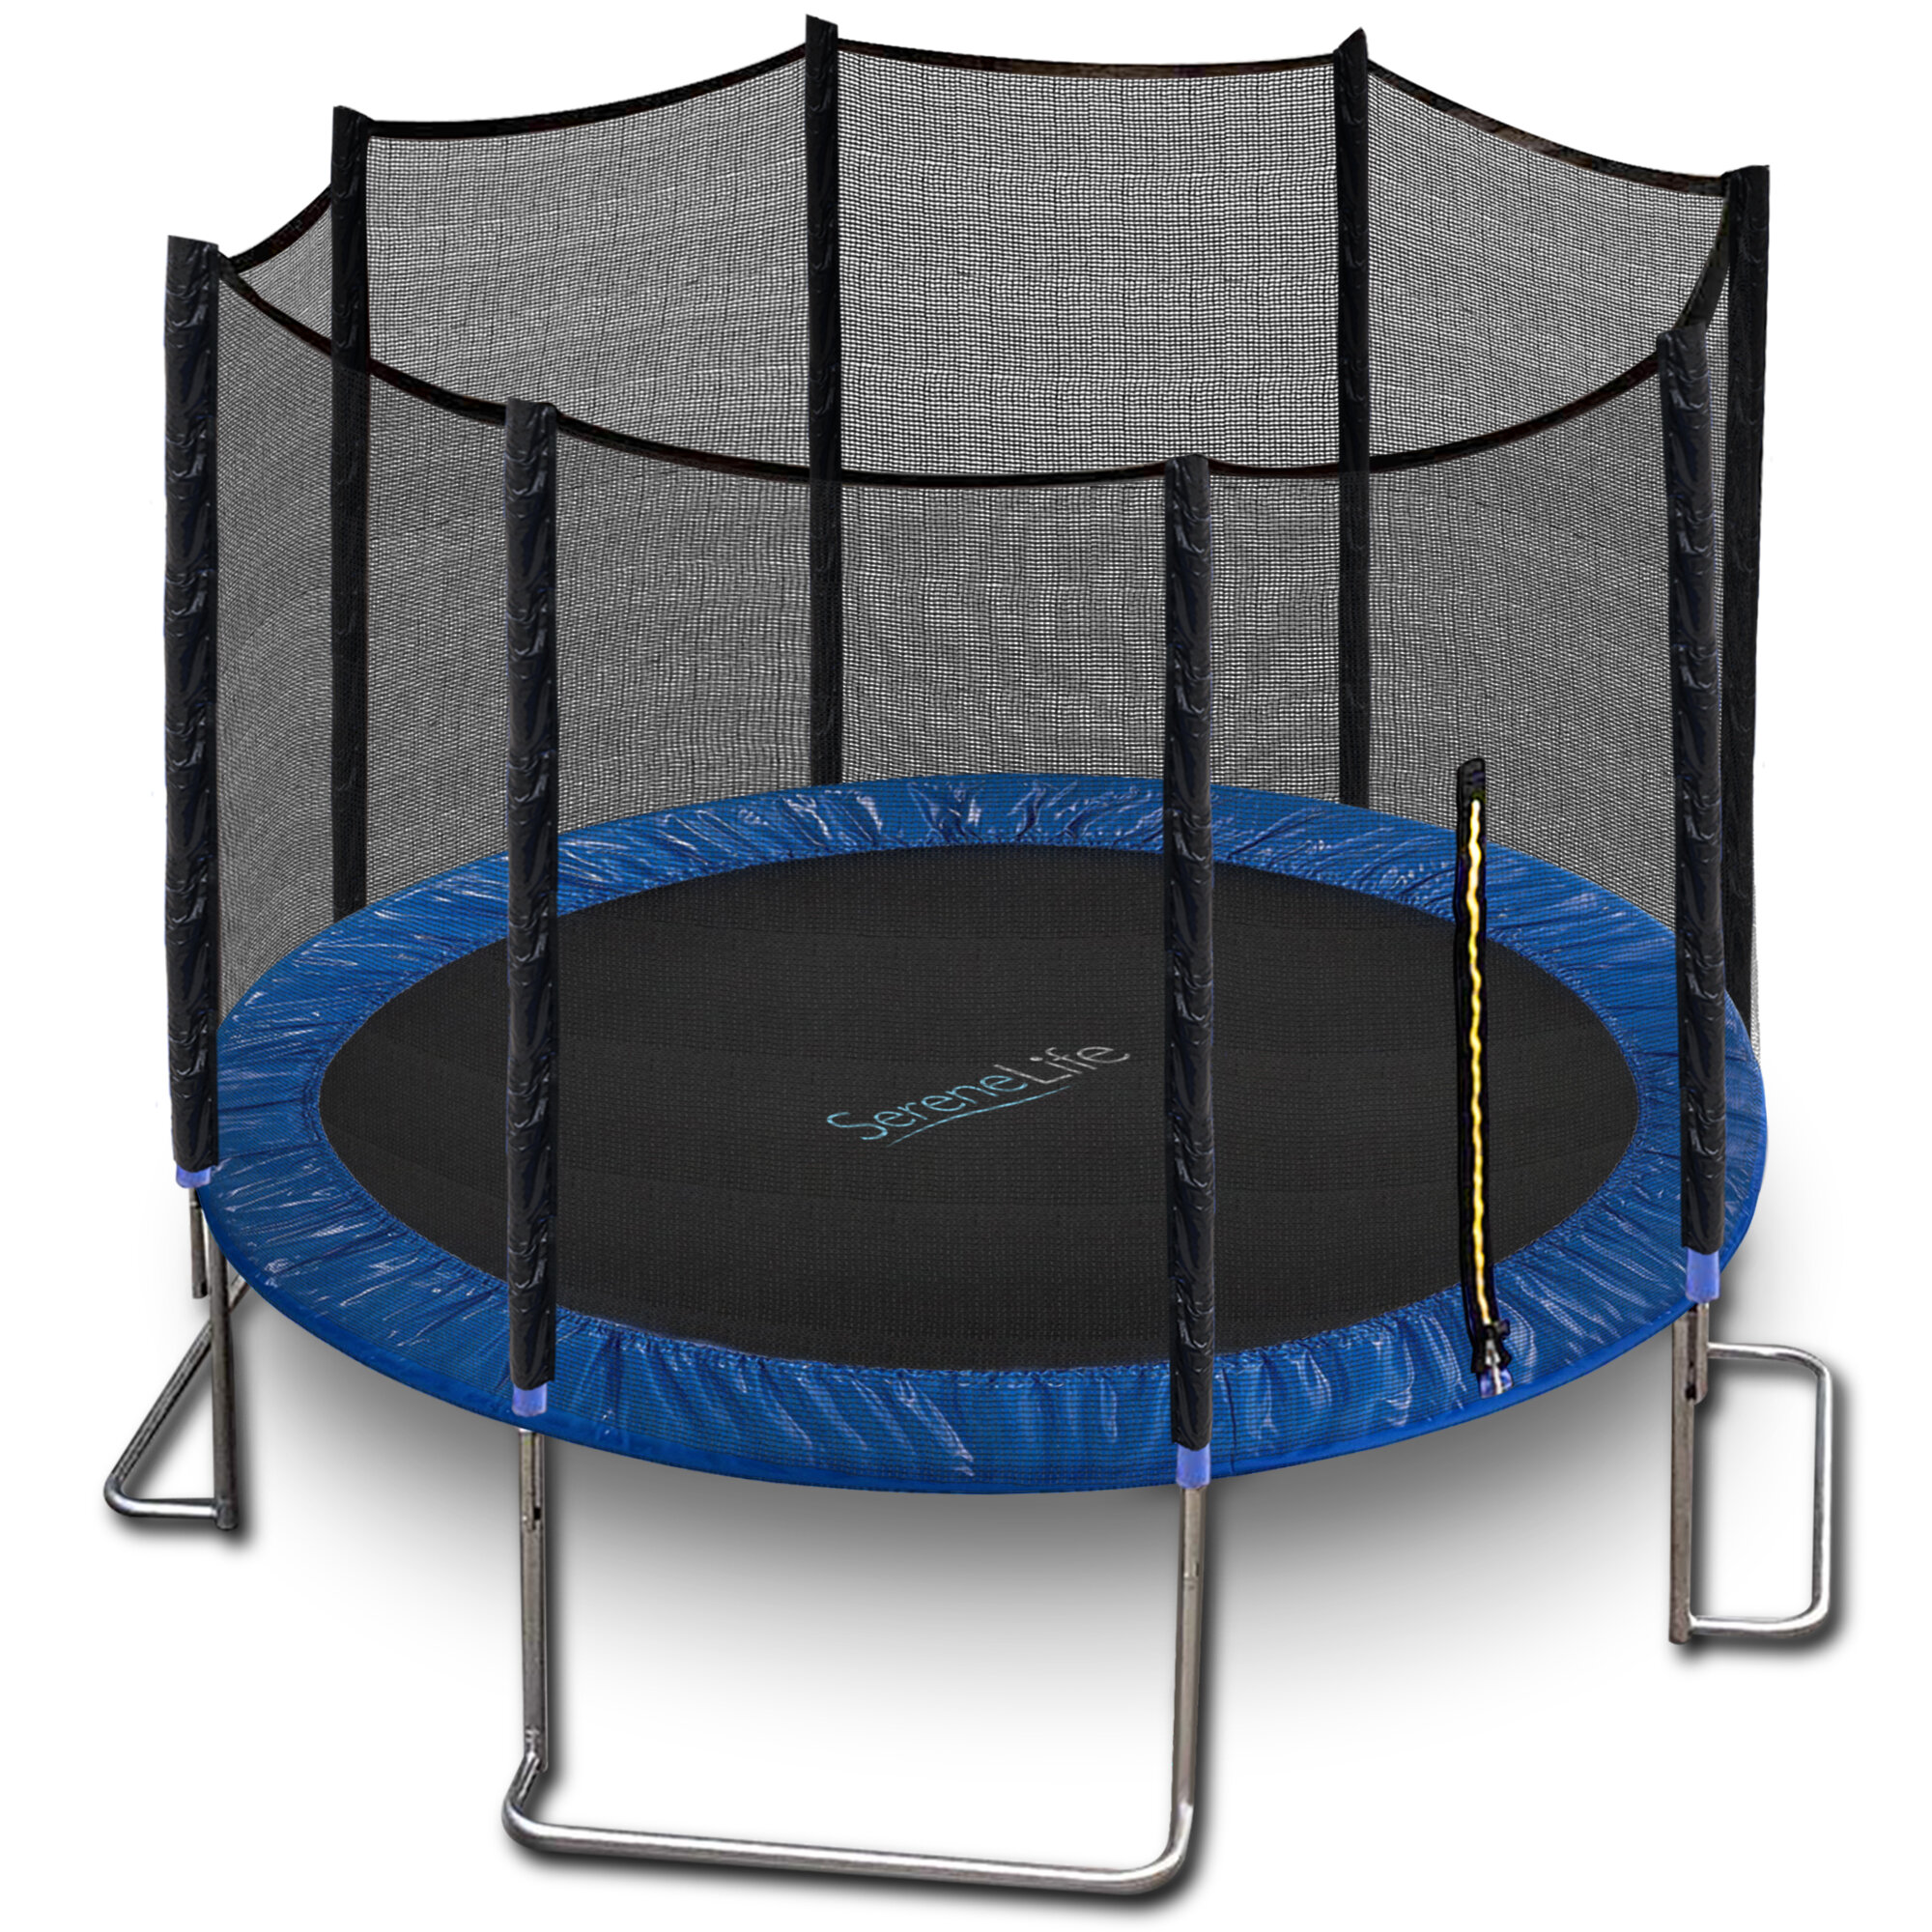 Advarsel Envision munching SereneLife Outdoor Trampoline With Enclosure 12Ft - Full Size Backyard  Trampoline With Safety Net - Enclosed Trampoline For Kids, Teen, Adult - 12  Feet Indoor Outdoor Trampolines | Wayfair